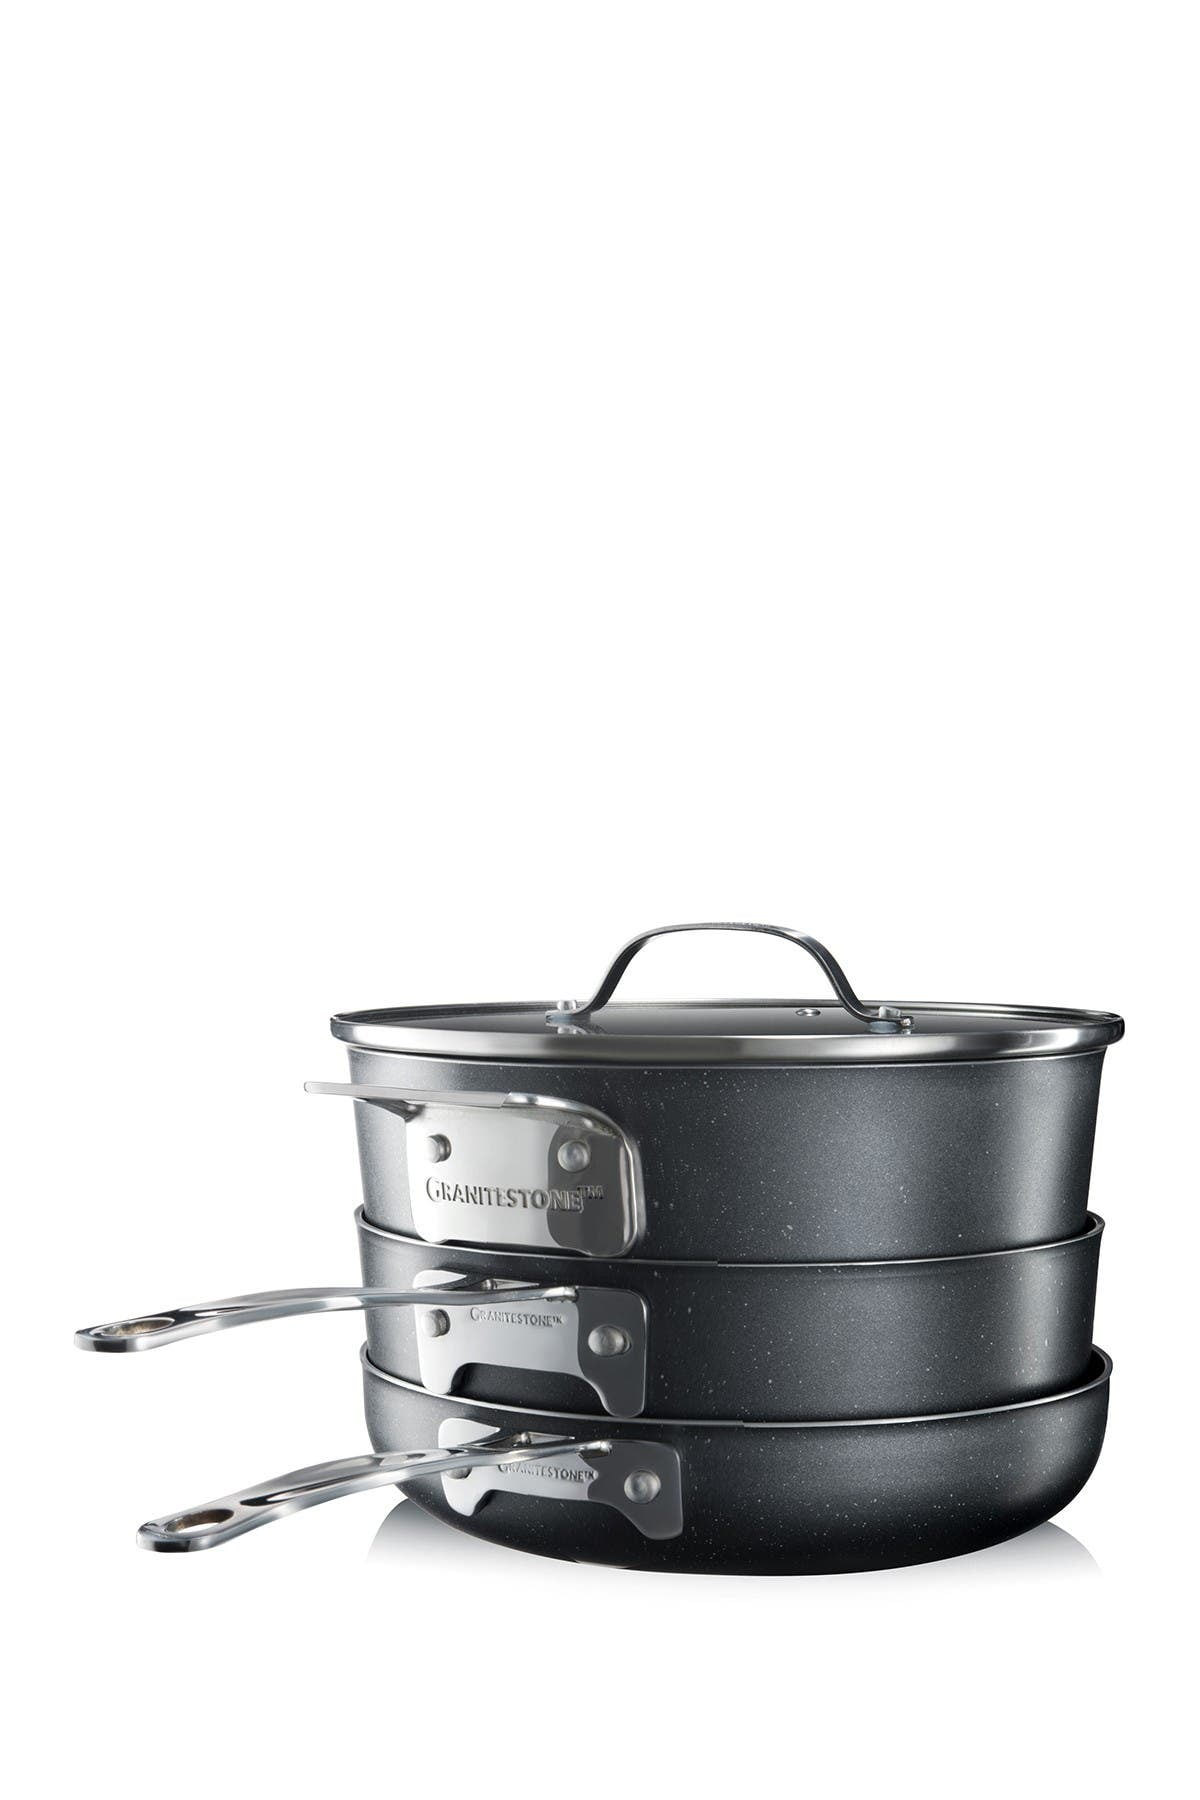 17pc Stacking Cookware Set with Foldable Knobs - Stackable Pots and Pans